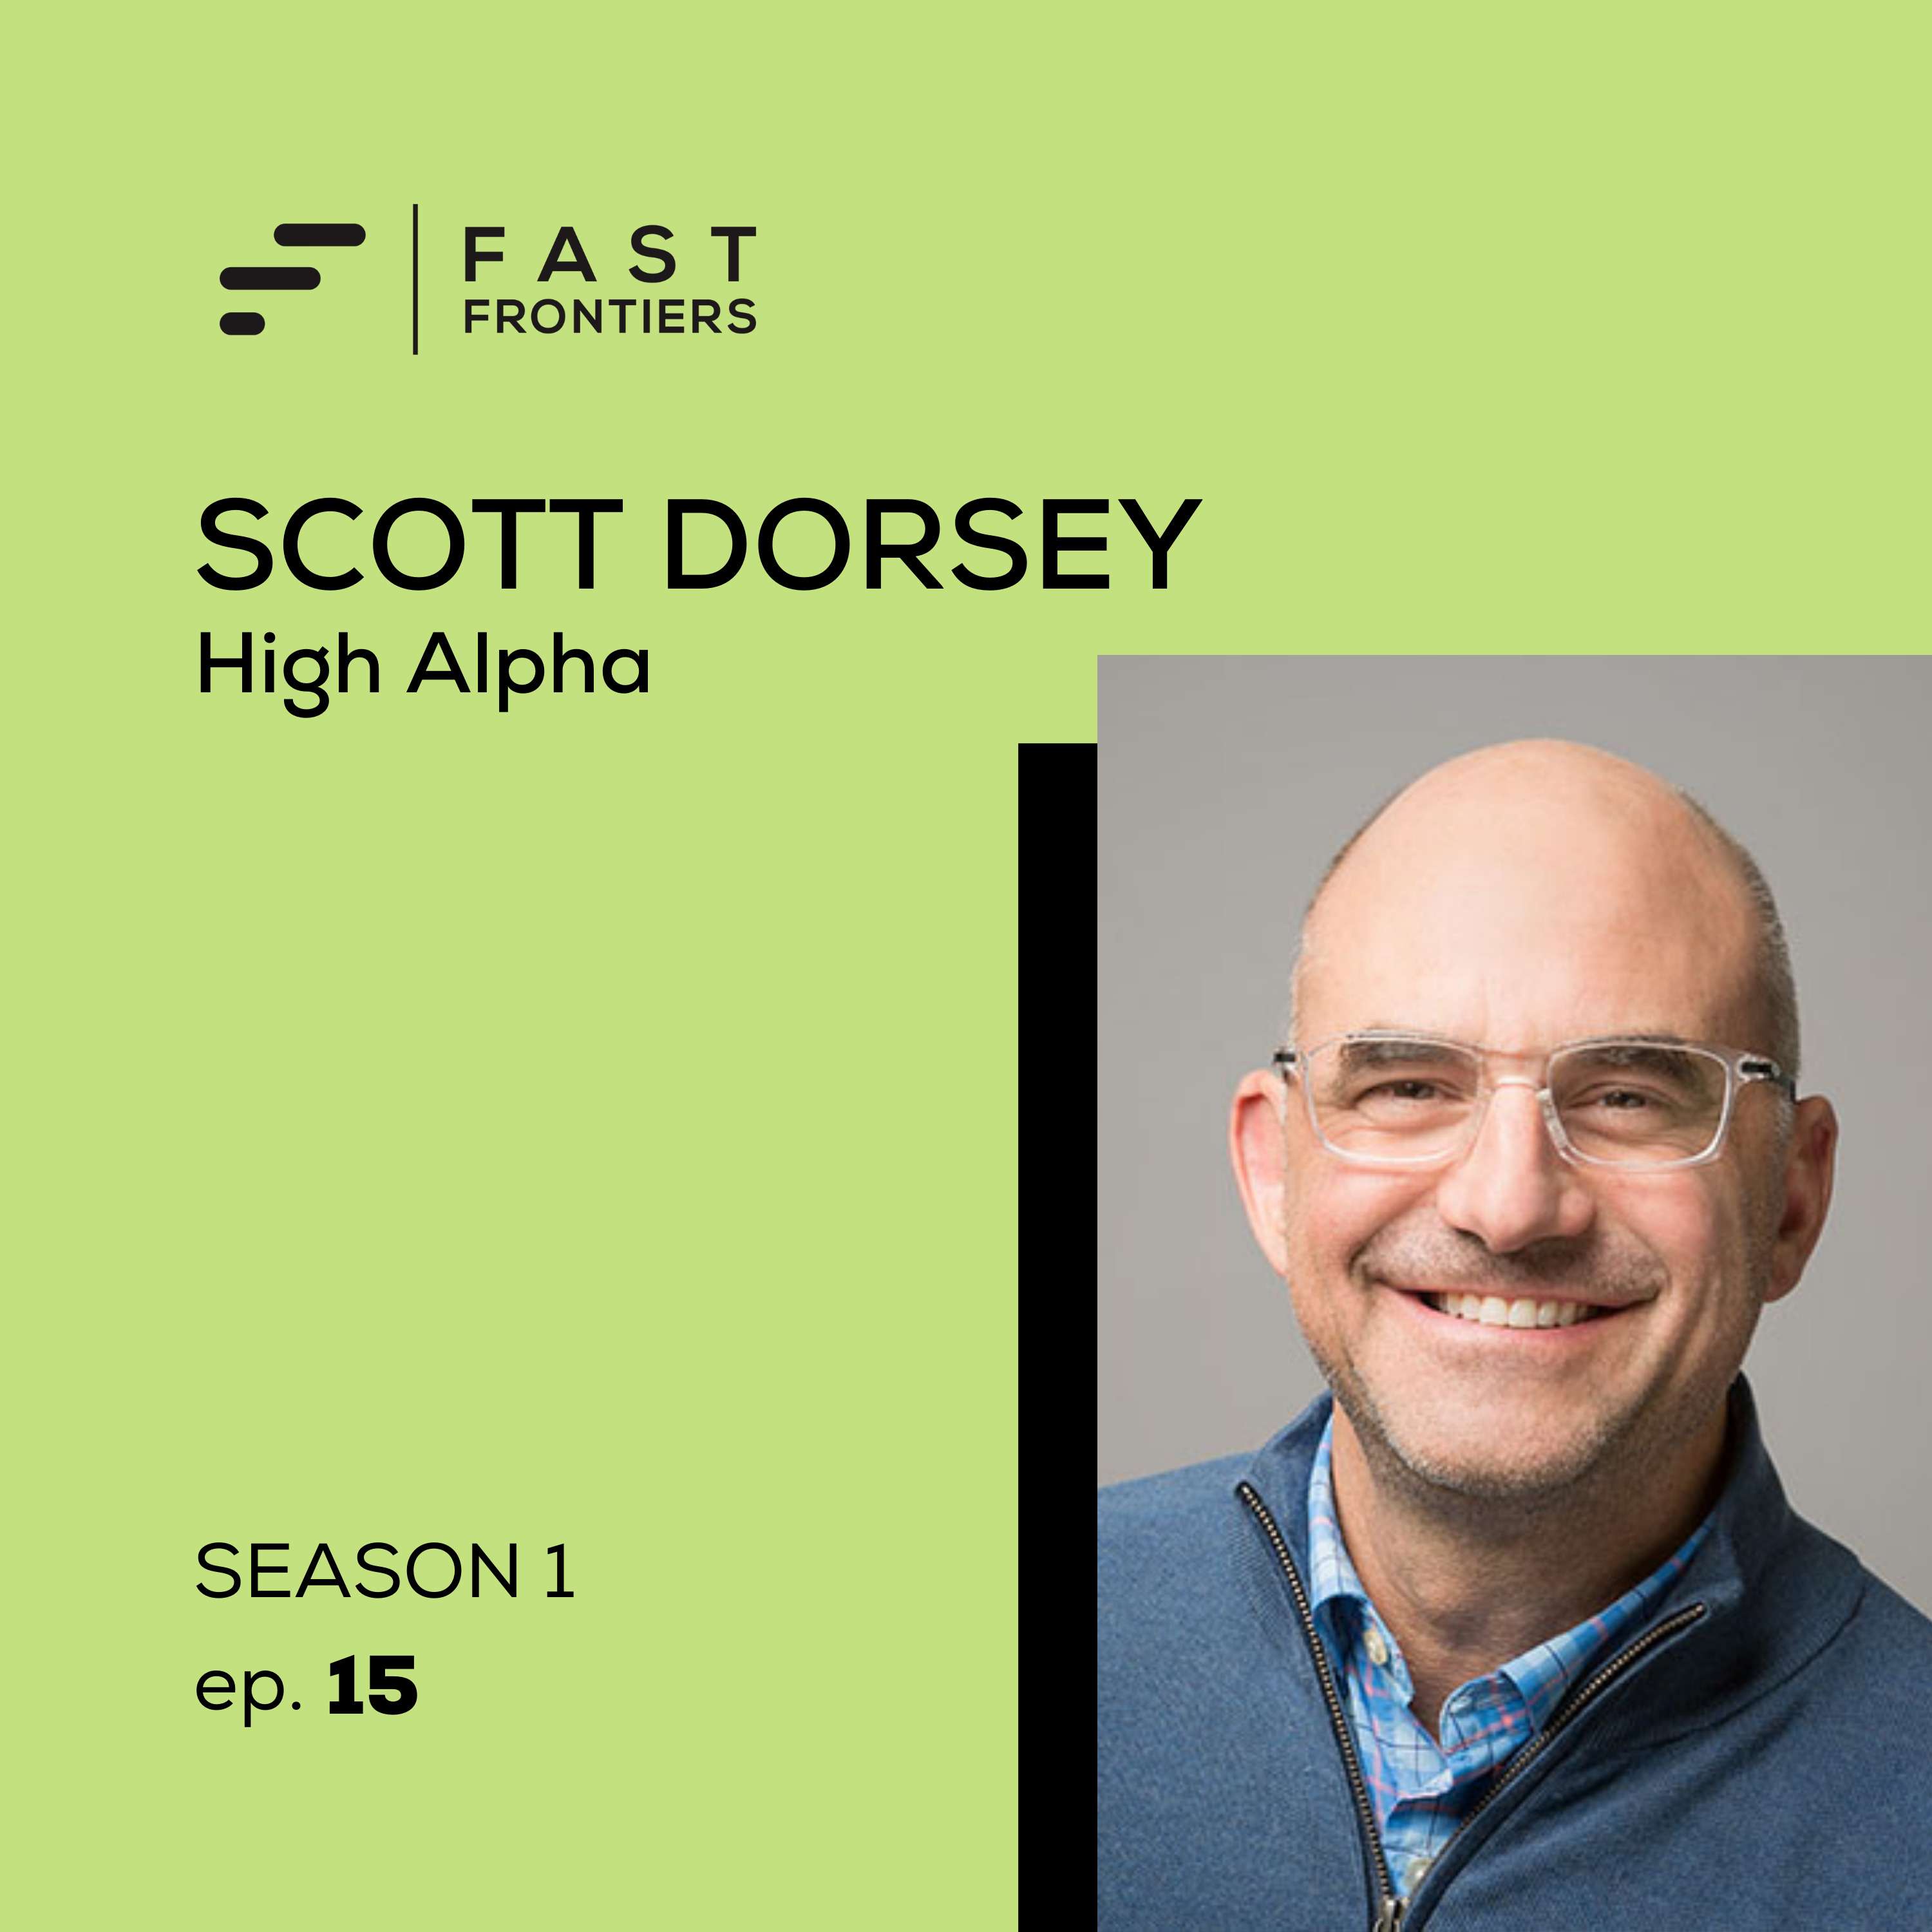 [Fast Frontiers] Scott Dorsey, co-founder and managing partner at High Alpha and former CEO of ExactTarget